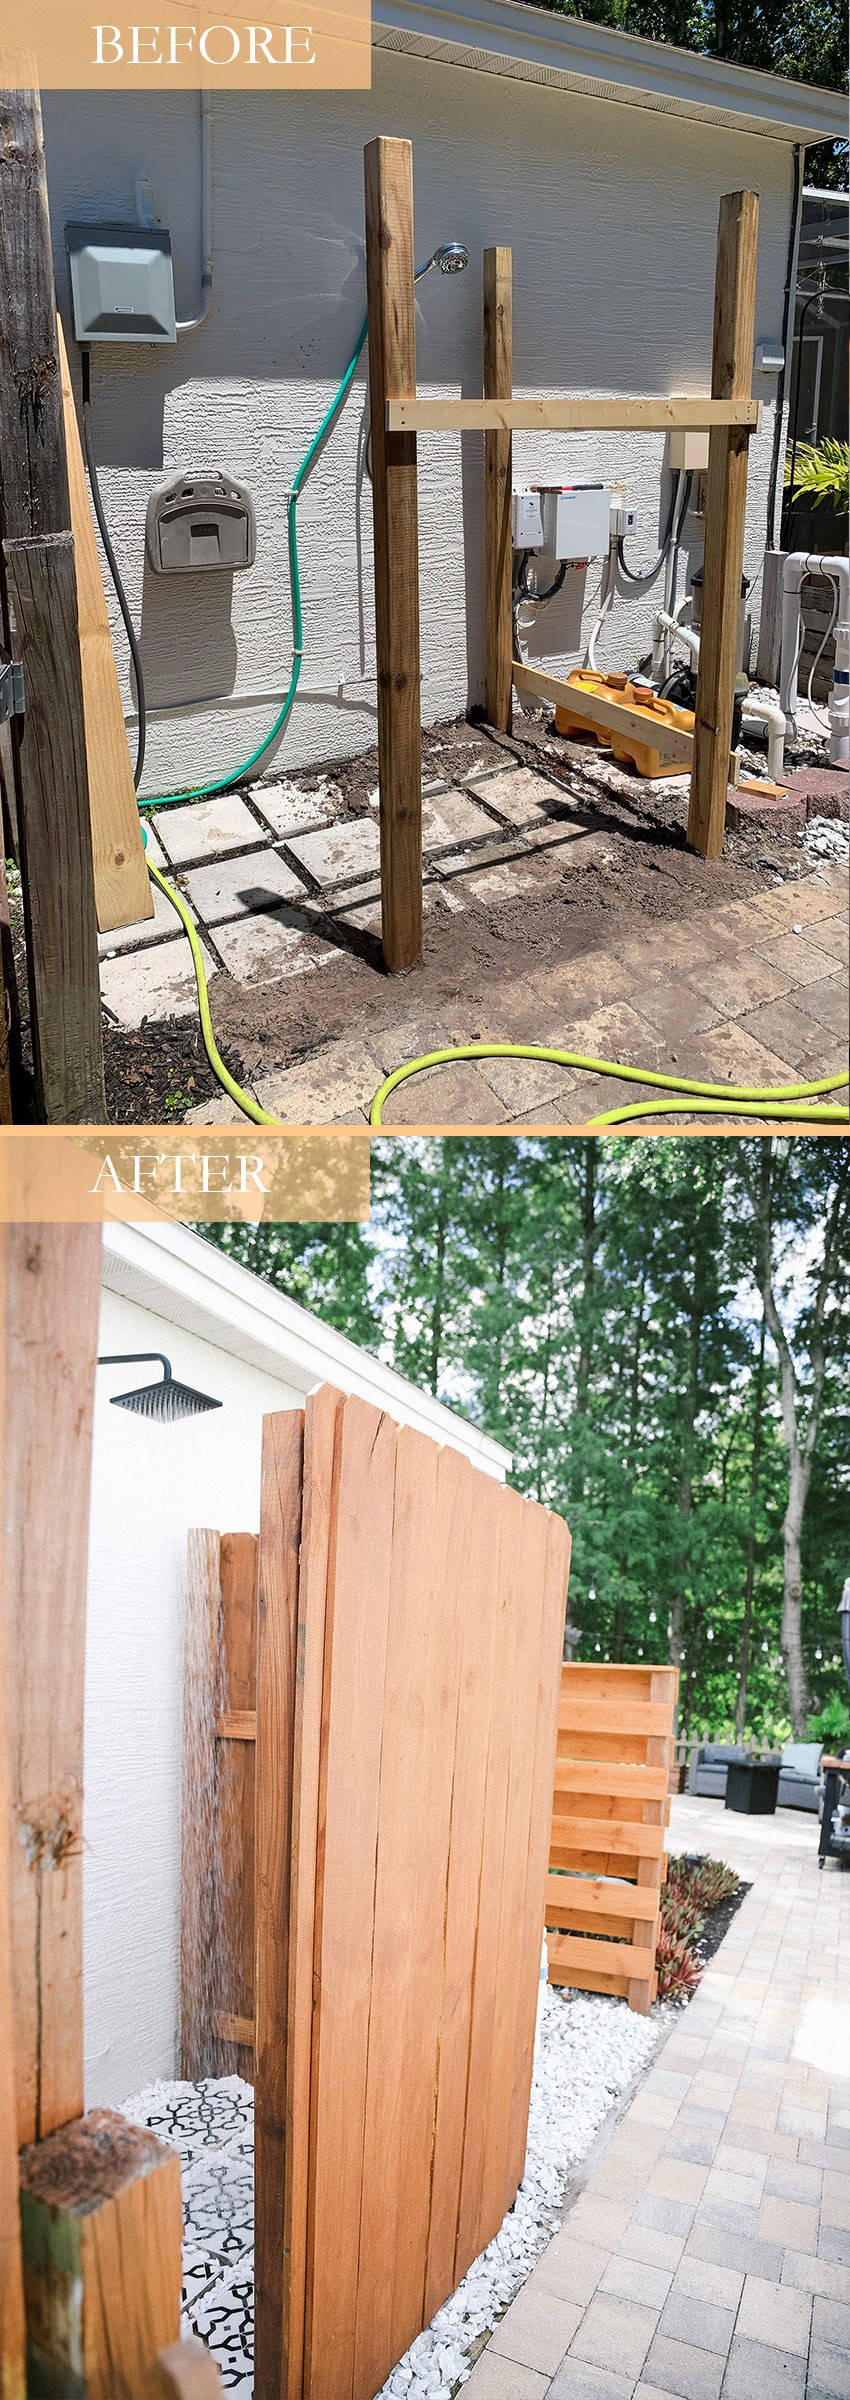 DIY Outdoor Shower Ideas on a Budget for the Ultimate Backyard Oasis Before and After | DIY Outdoor Shower by popular Florida DIY blog, Fresh Mommy Blog: before and after image of a DIY outdoor shower. 